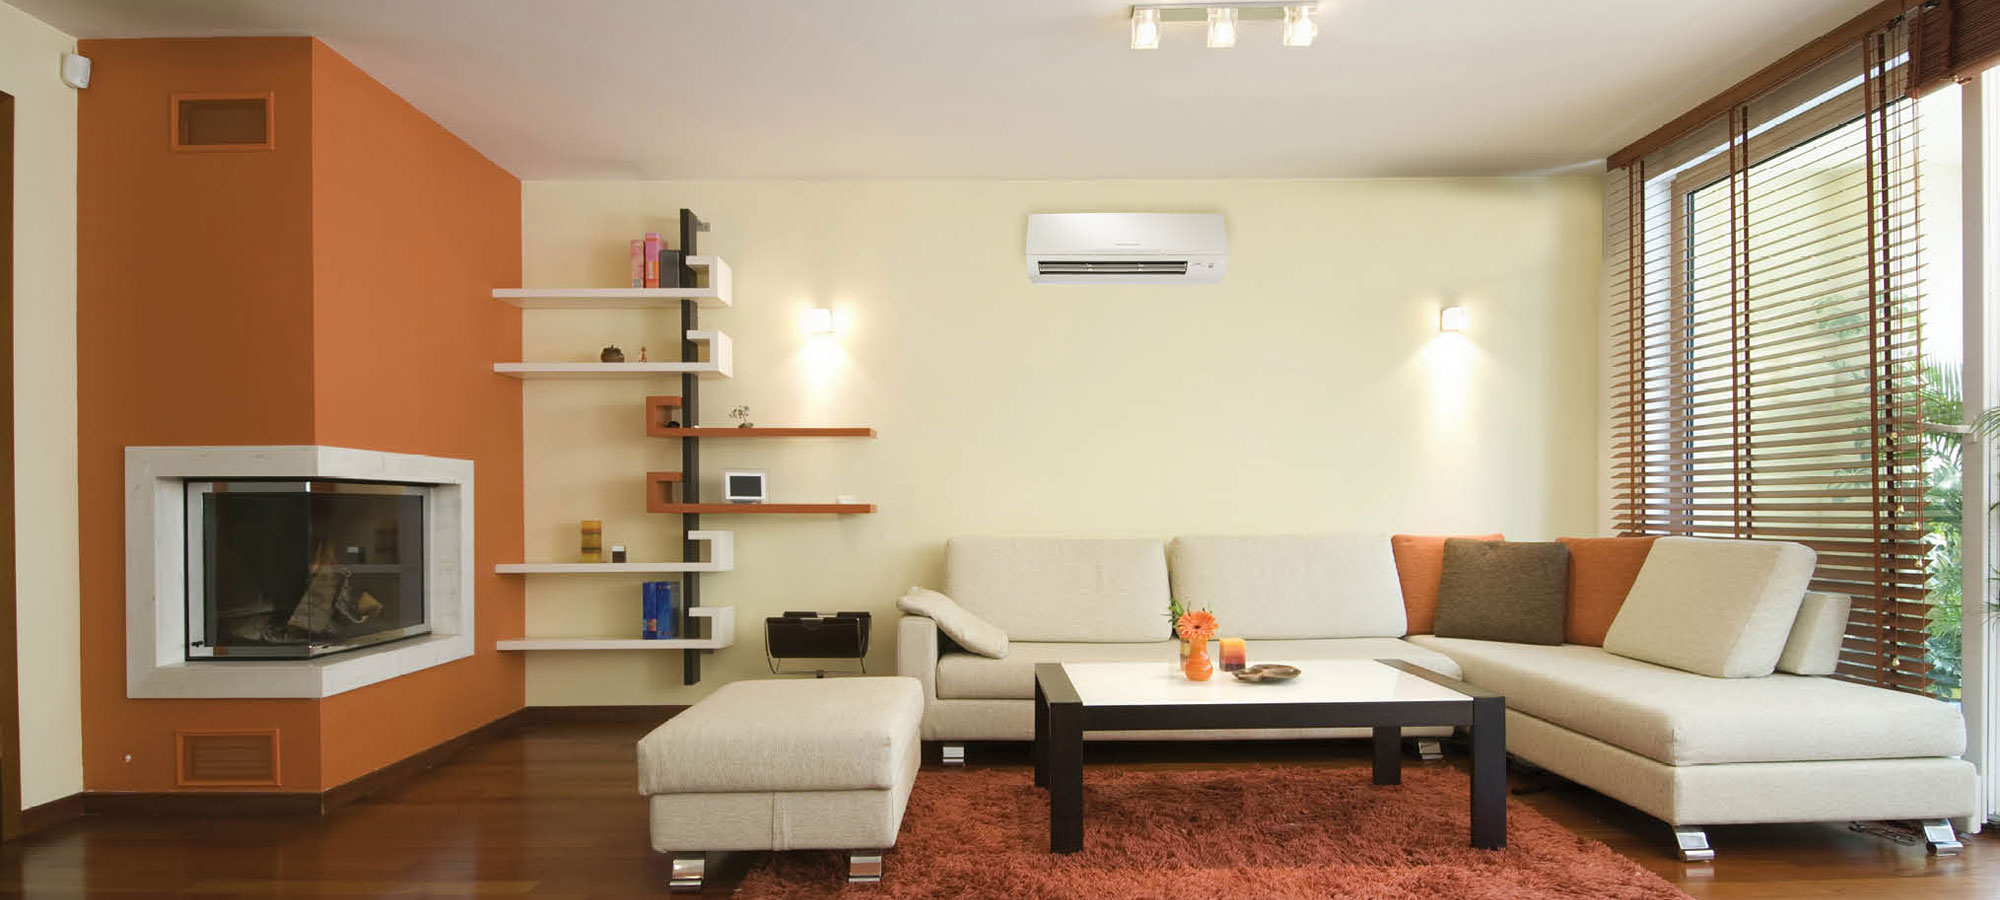 Ductless heat and air conditioning St. Paul